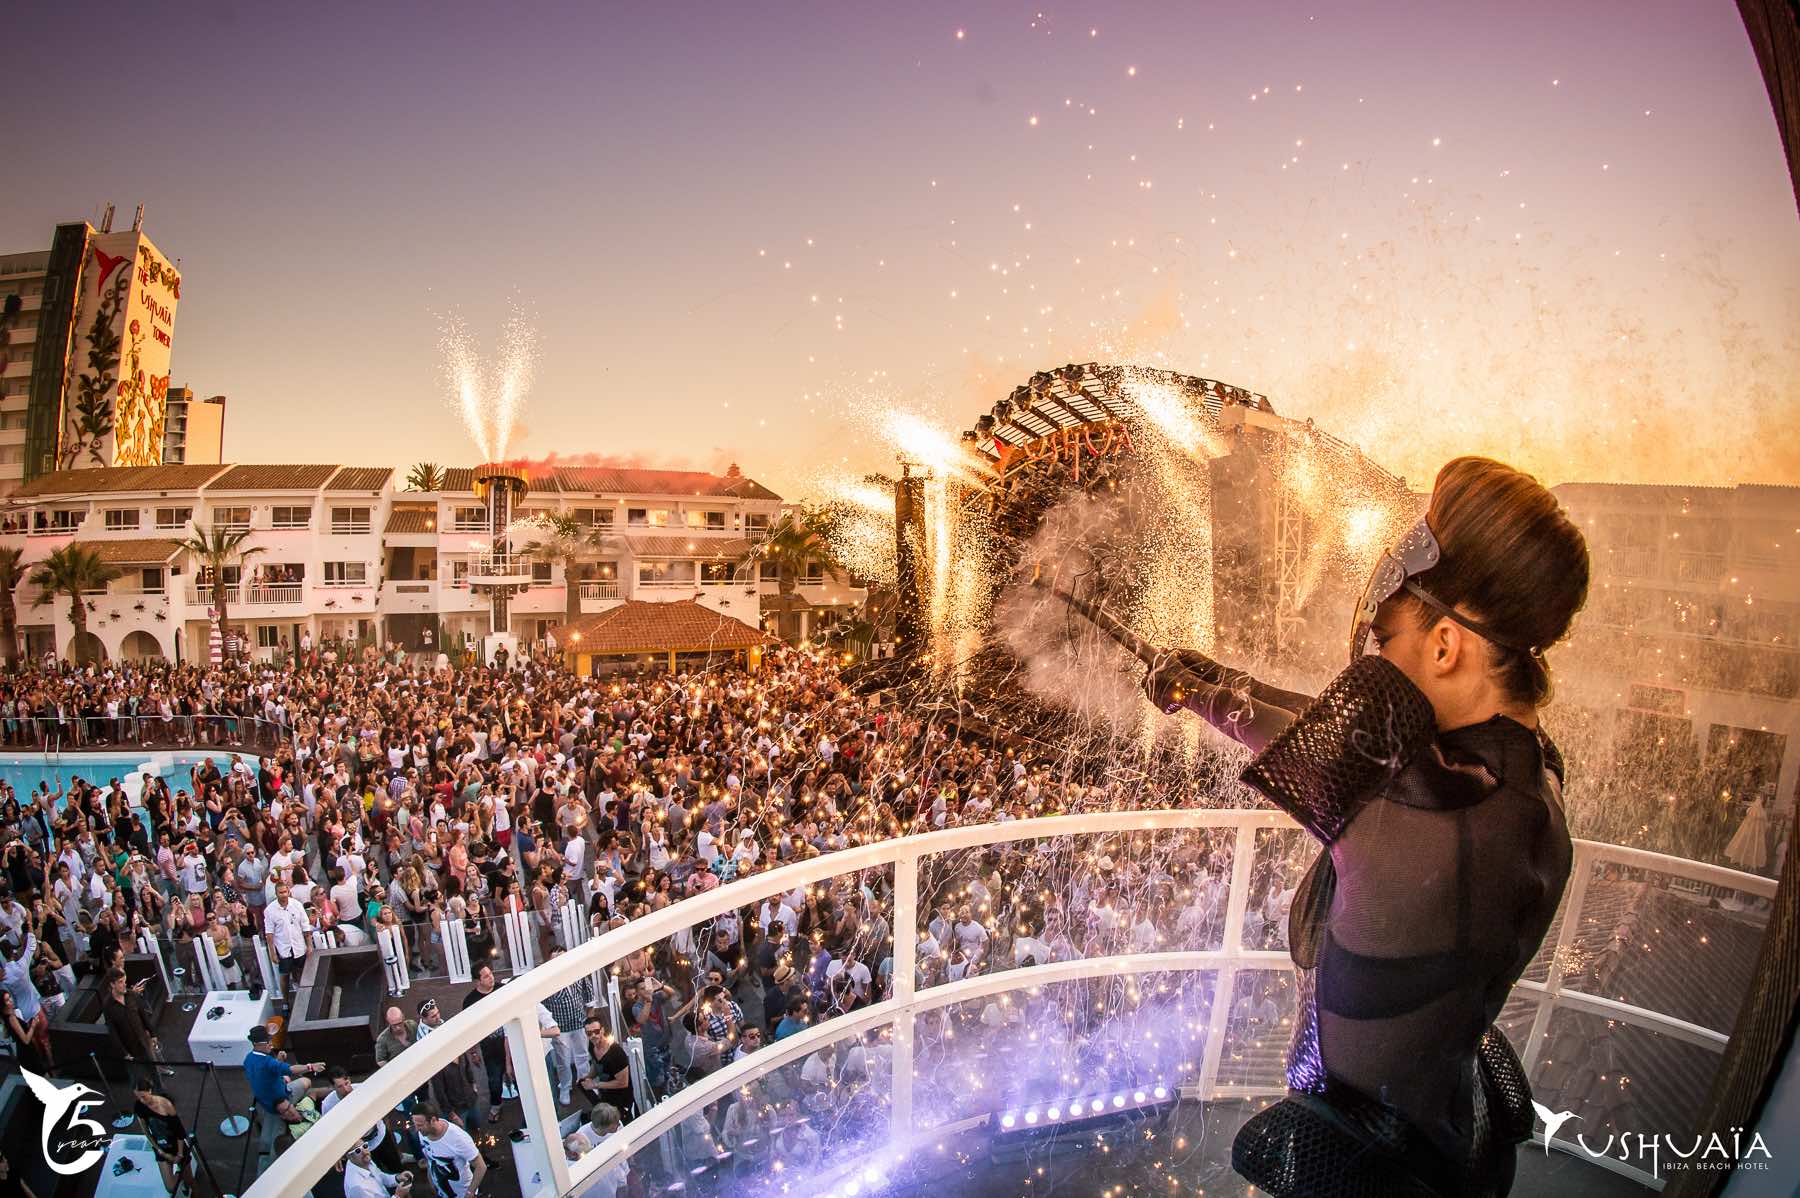 A First-Timer's Guide To Ibiza, Spain's EDM Party Island - Ticketmaster Blog